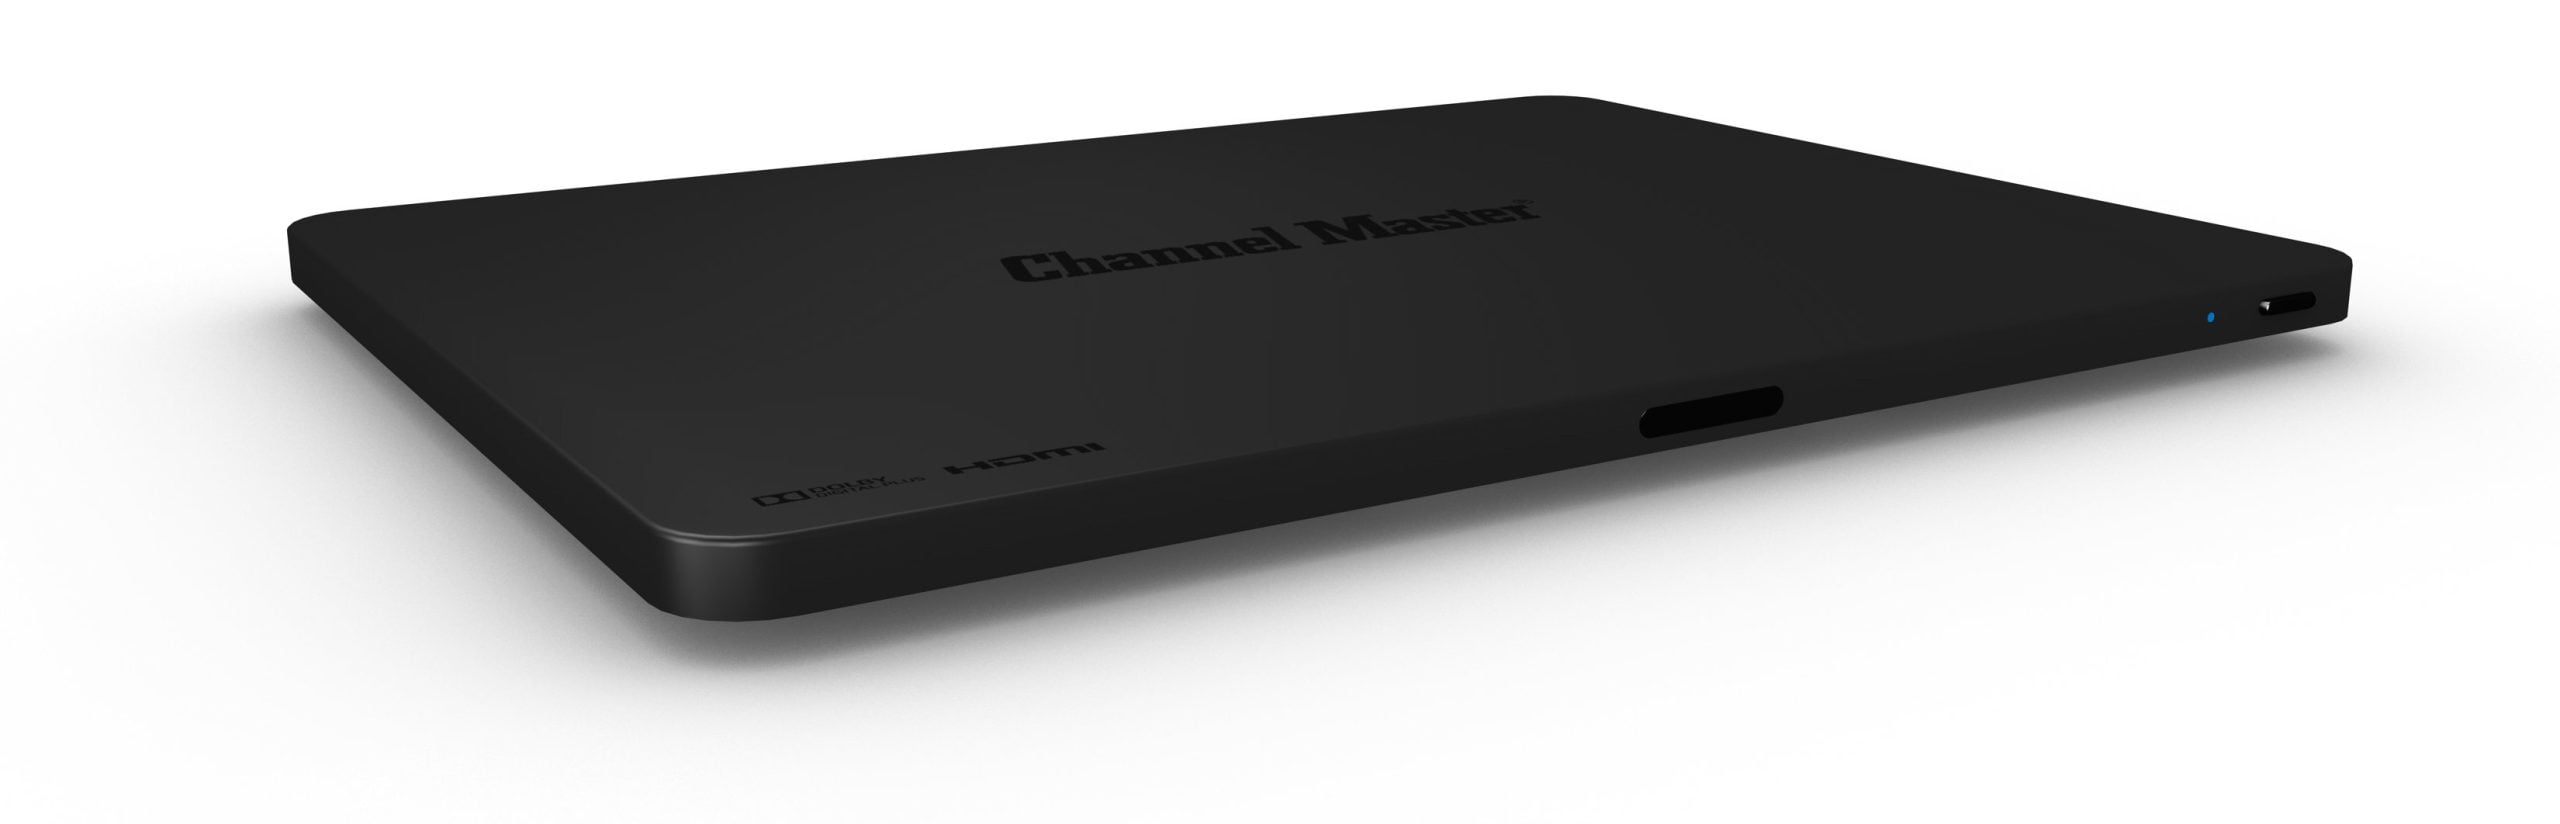 Channel Master DVR+ Review